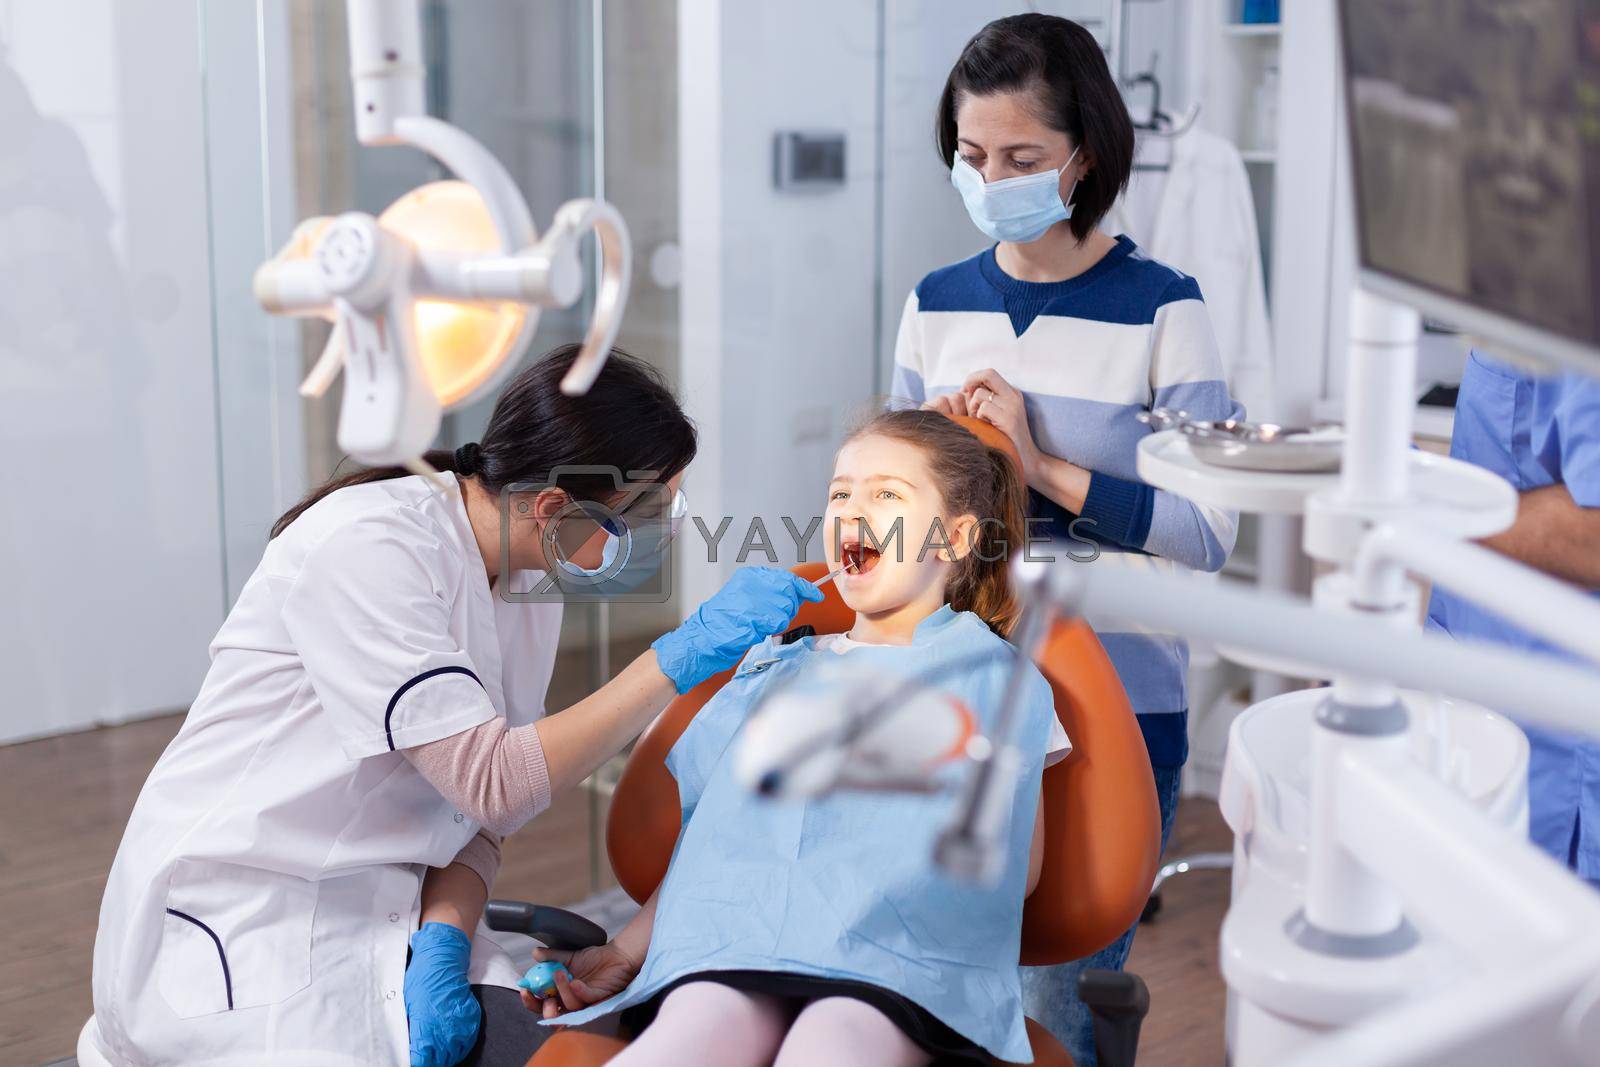 Angled mirror used by dentist doctor on little girl with mouth open in dental office. Dentistry specialist during child cavity consultation in stomatology office using modern technology.